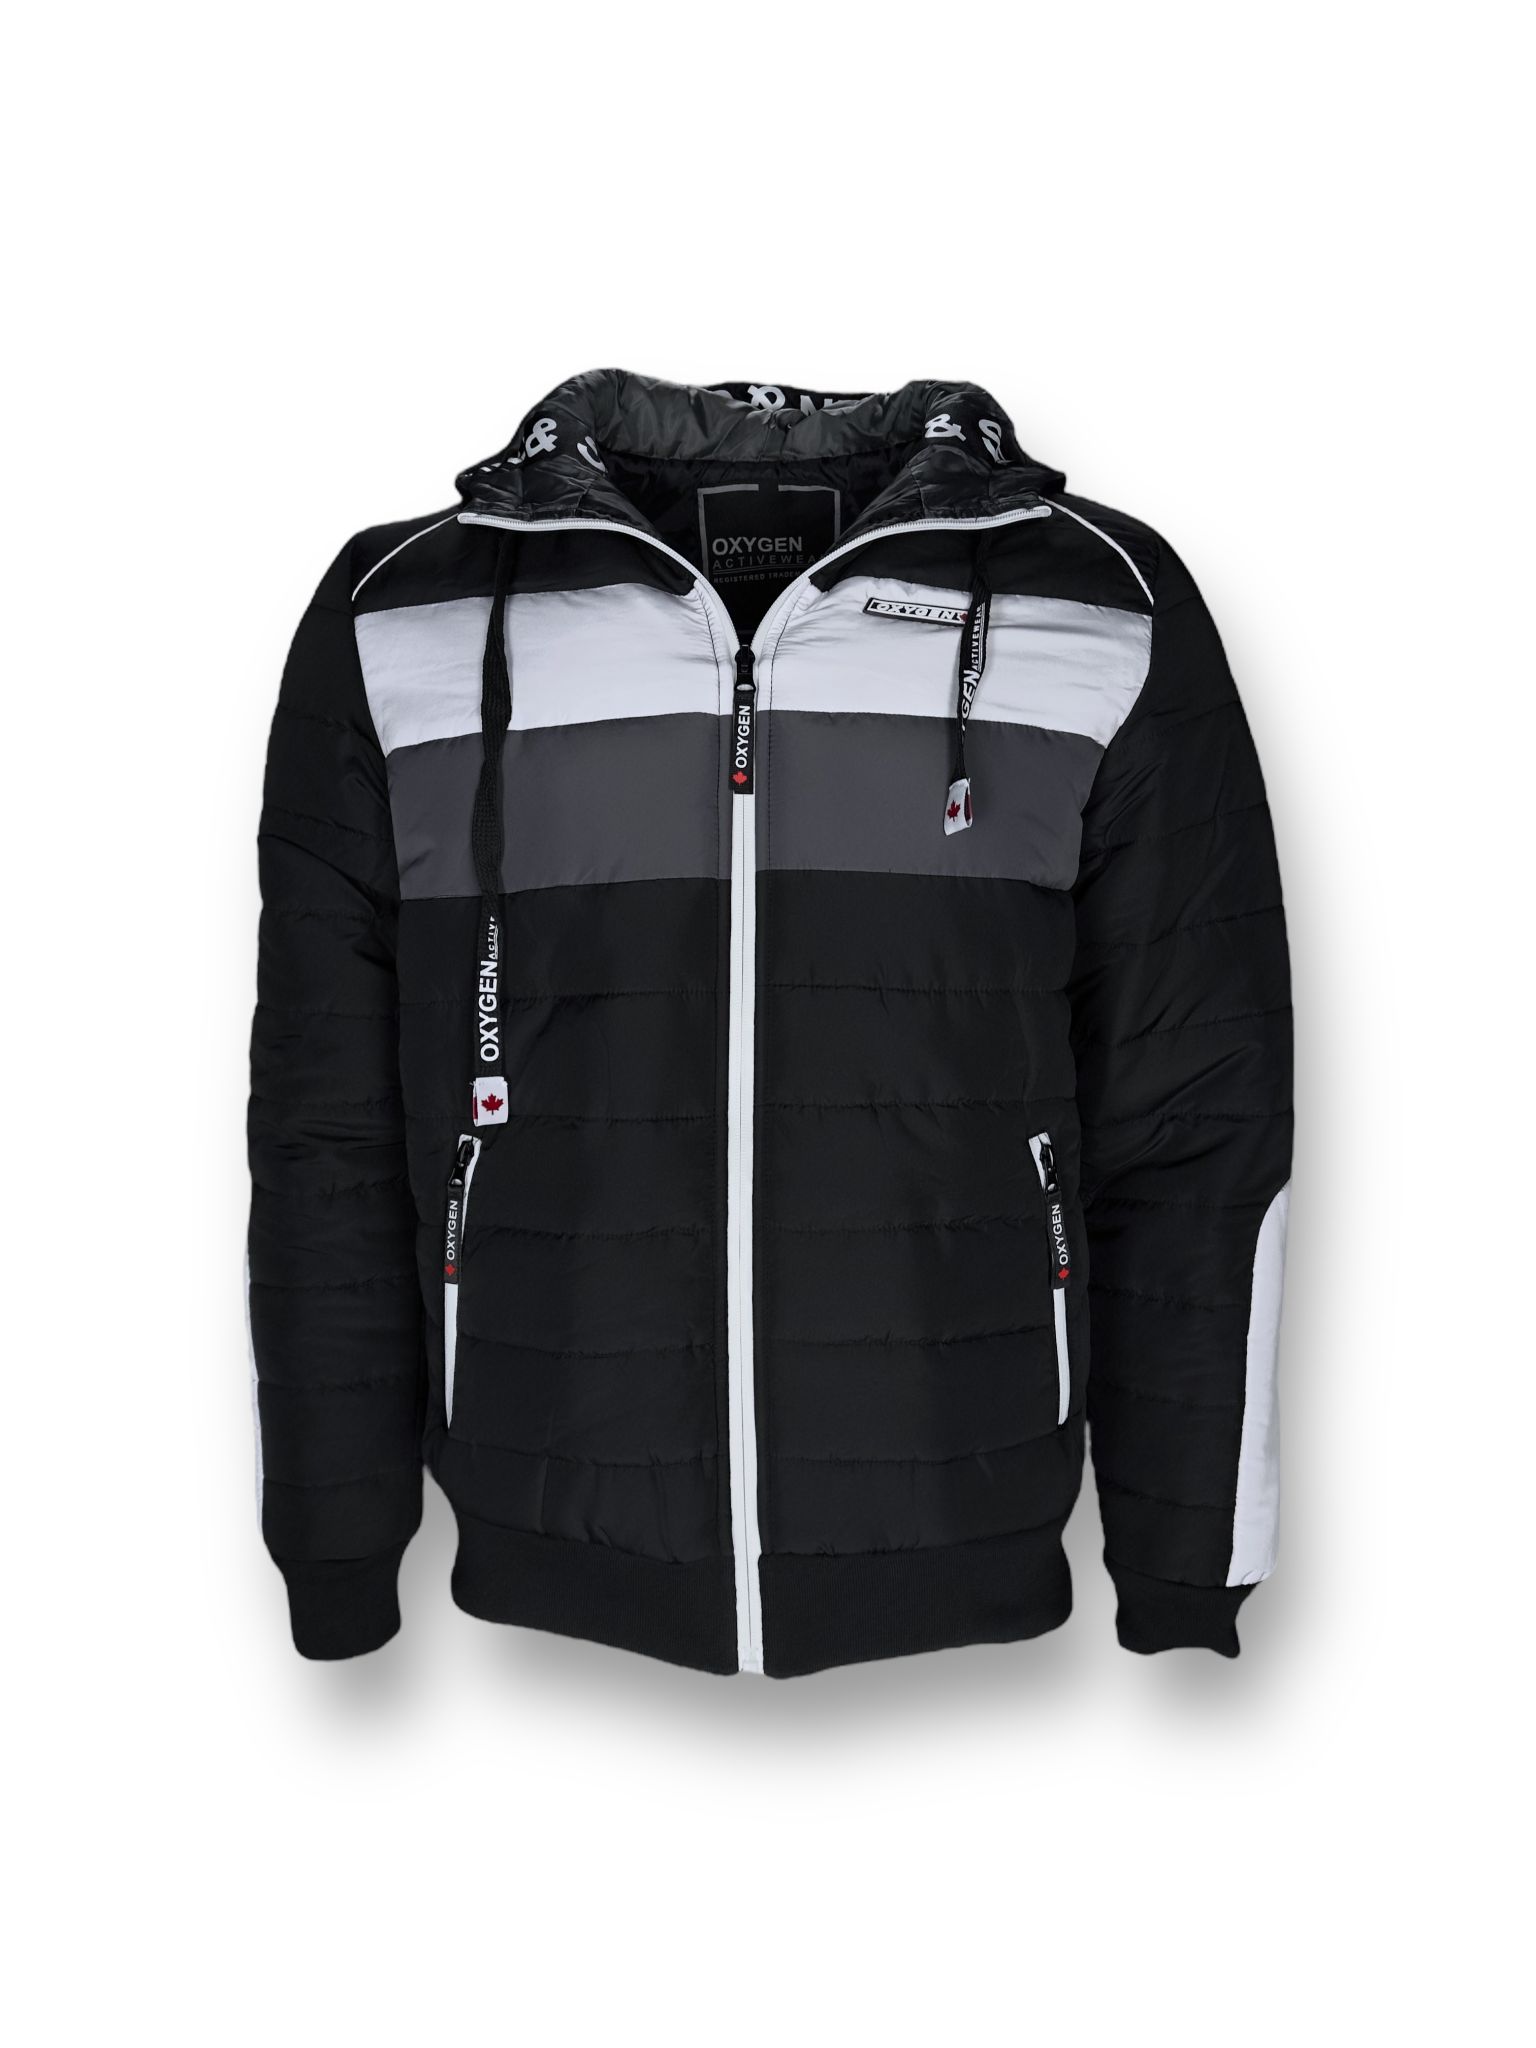 MS100-437 BLK WIND JACKET WITH CORD